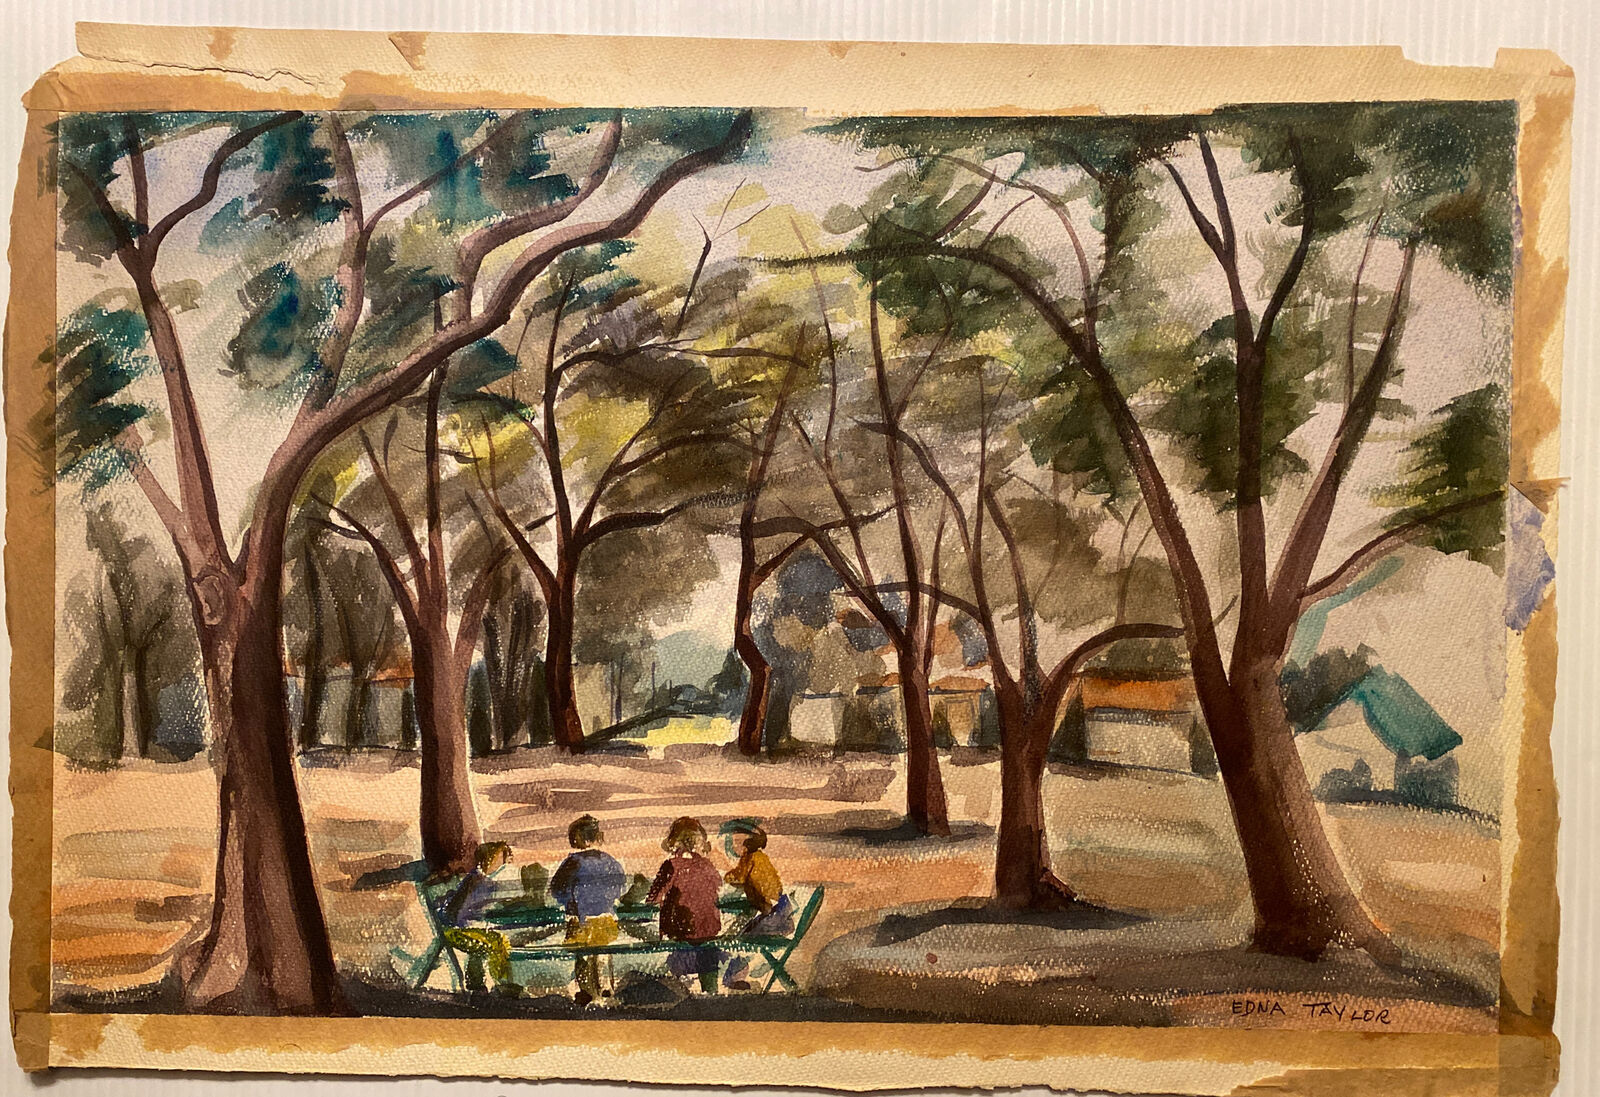 ORIGINAL “EDNA TAYLOR”.  LANDSCAPE  PEOPLE PICKNICK TREES WATERCOLOR  PAINTING